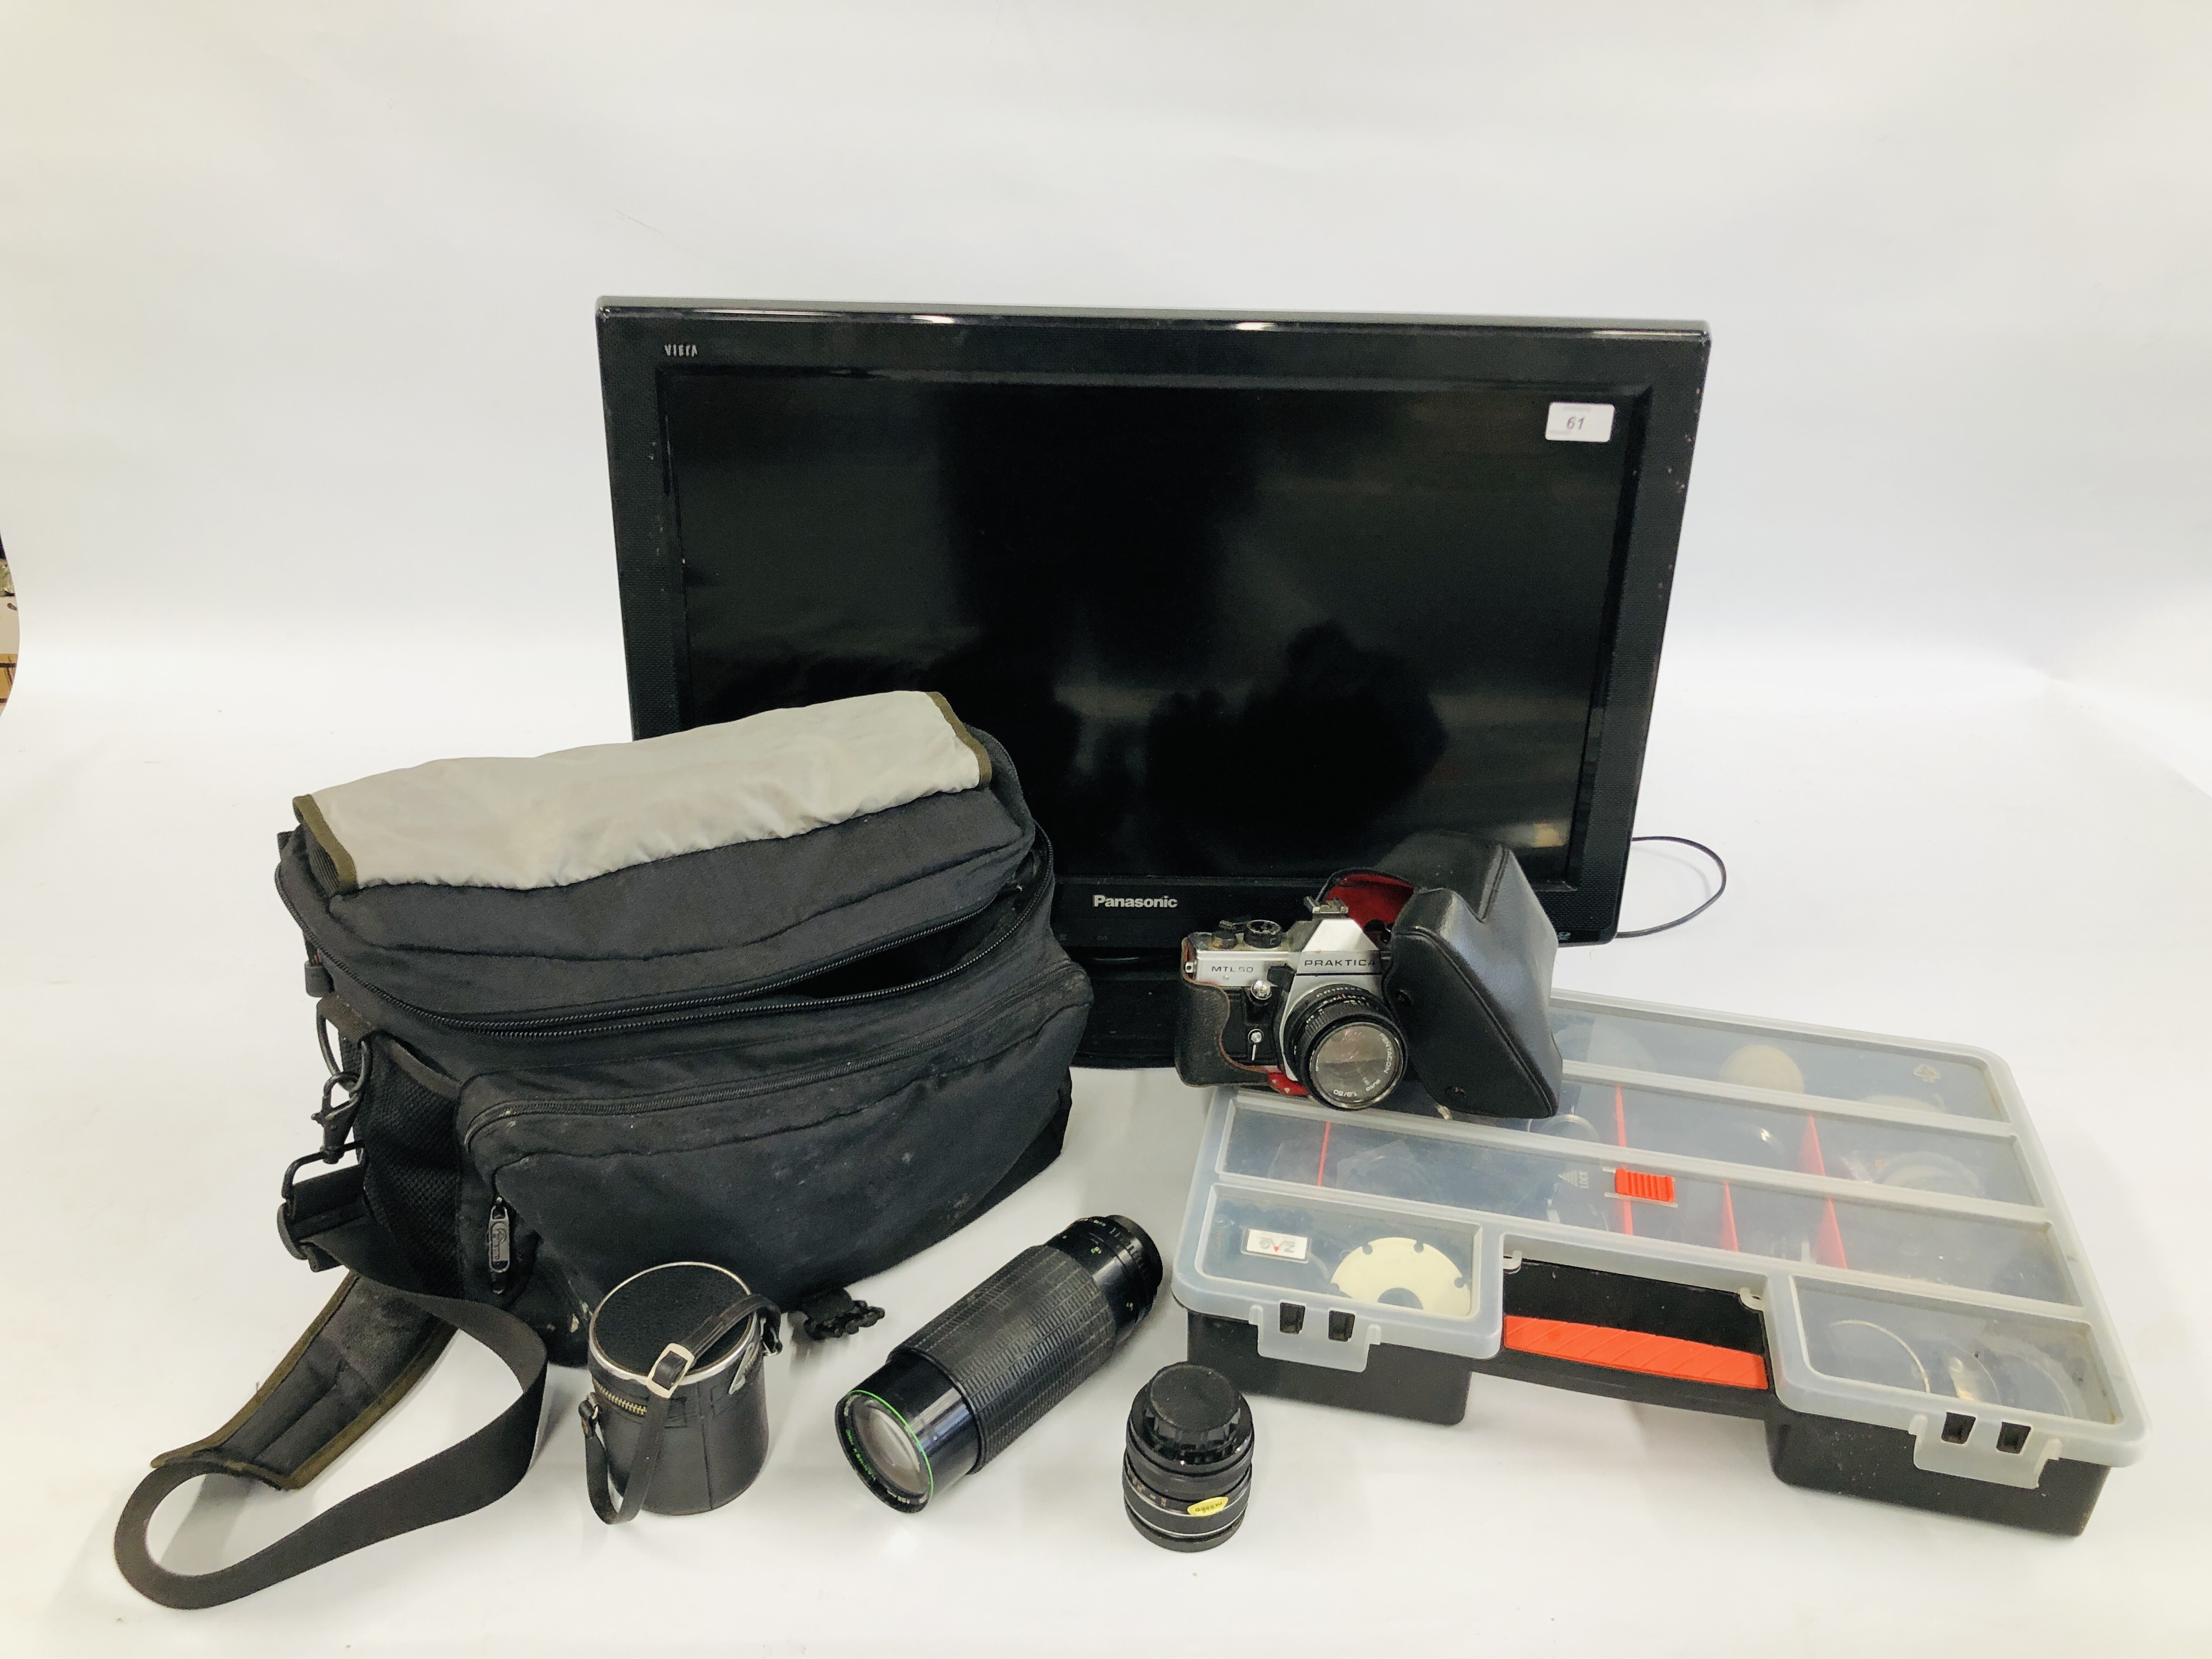 A PANASONIC 26" TV WITH REMOTE, COLLECTION OF CAMERA EQUIPMENT TO INCLUDE PAKTICA MTL 50 CAMERA,